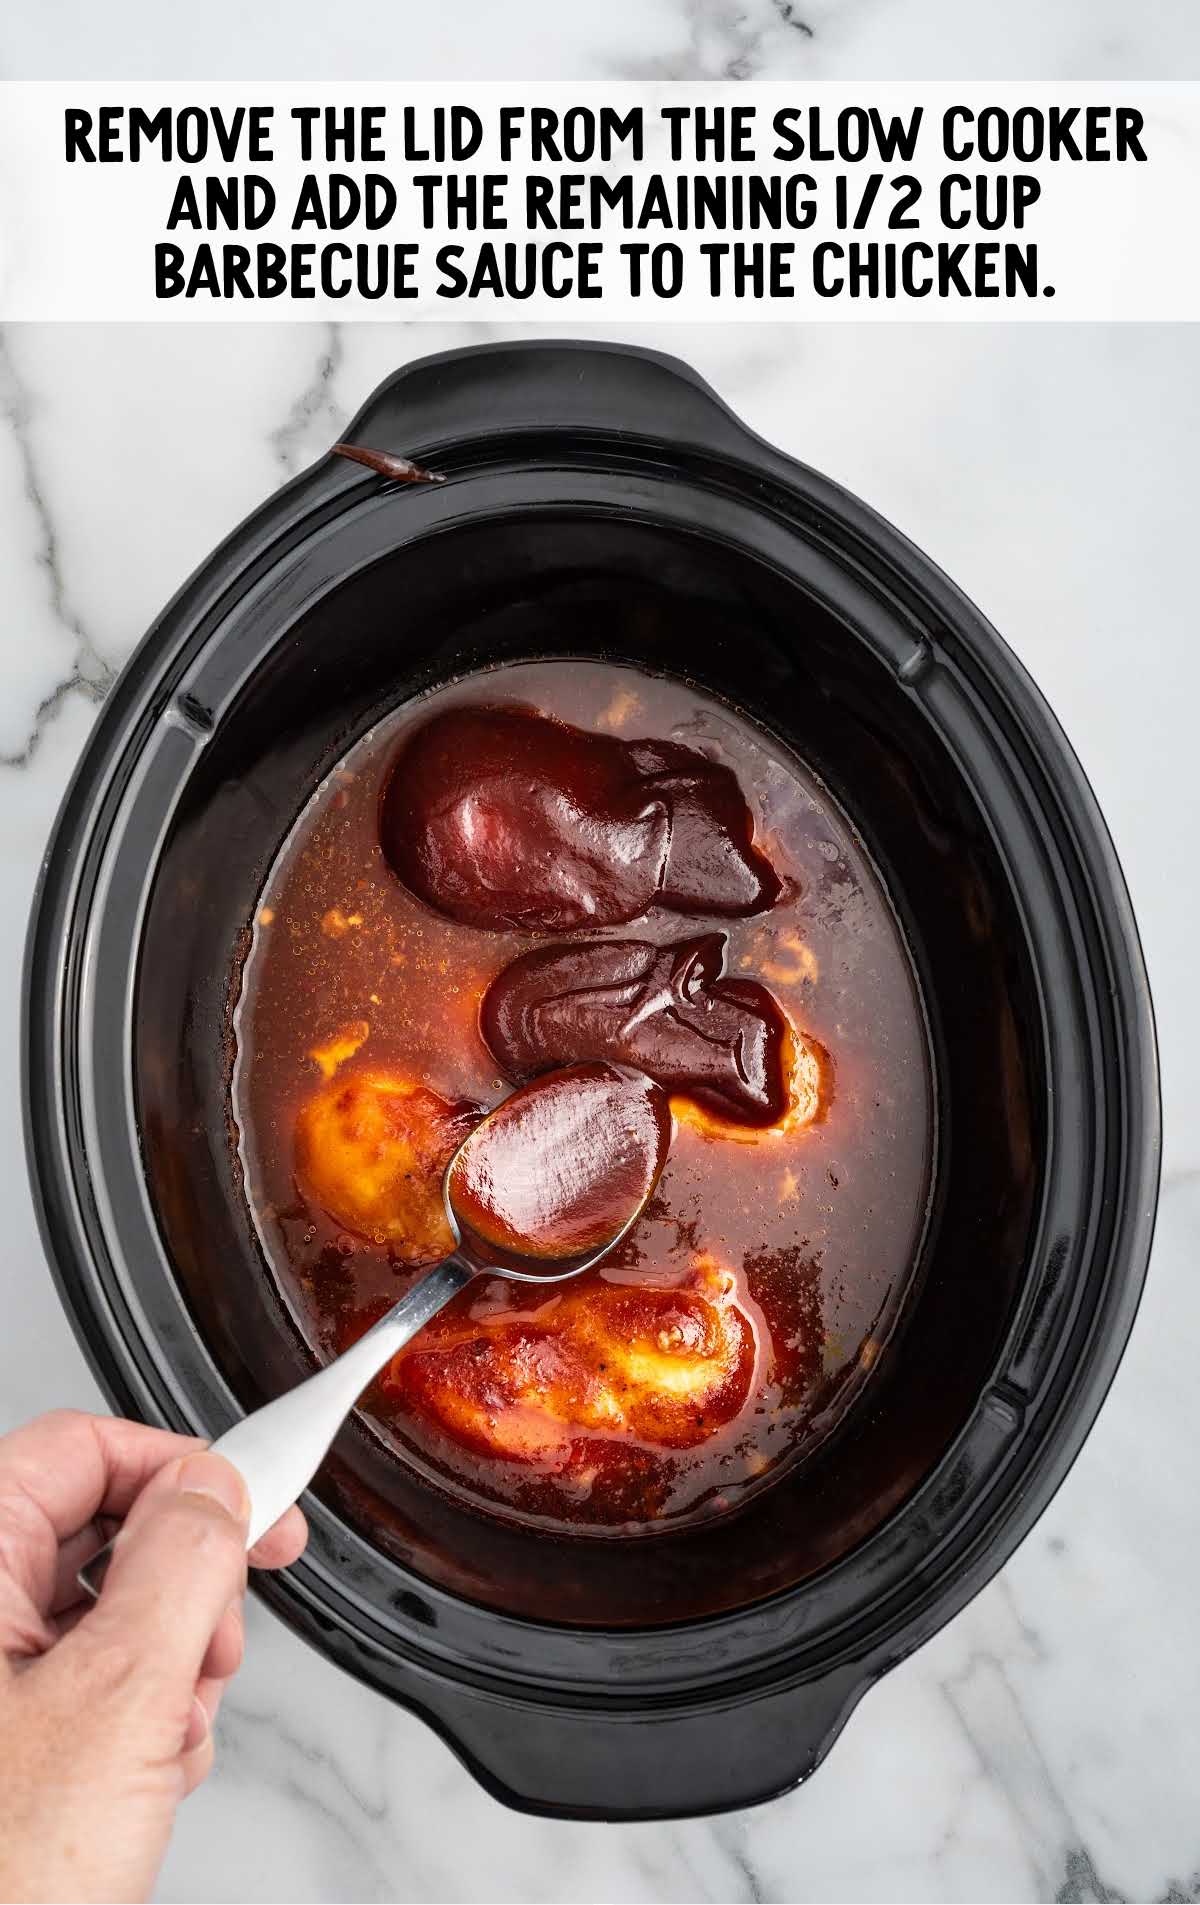 Sweet Baby Rays added to the crockpot